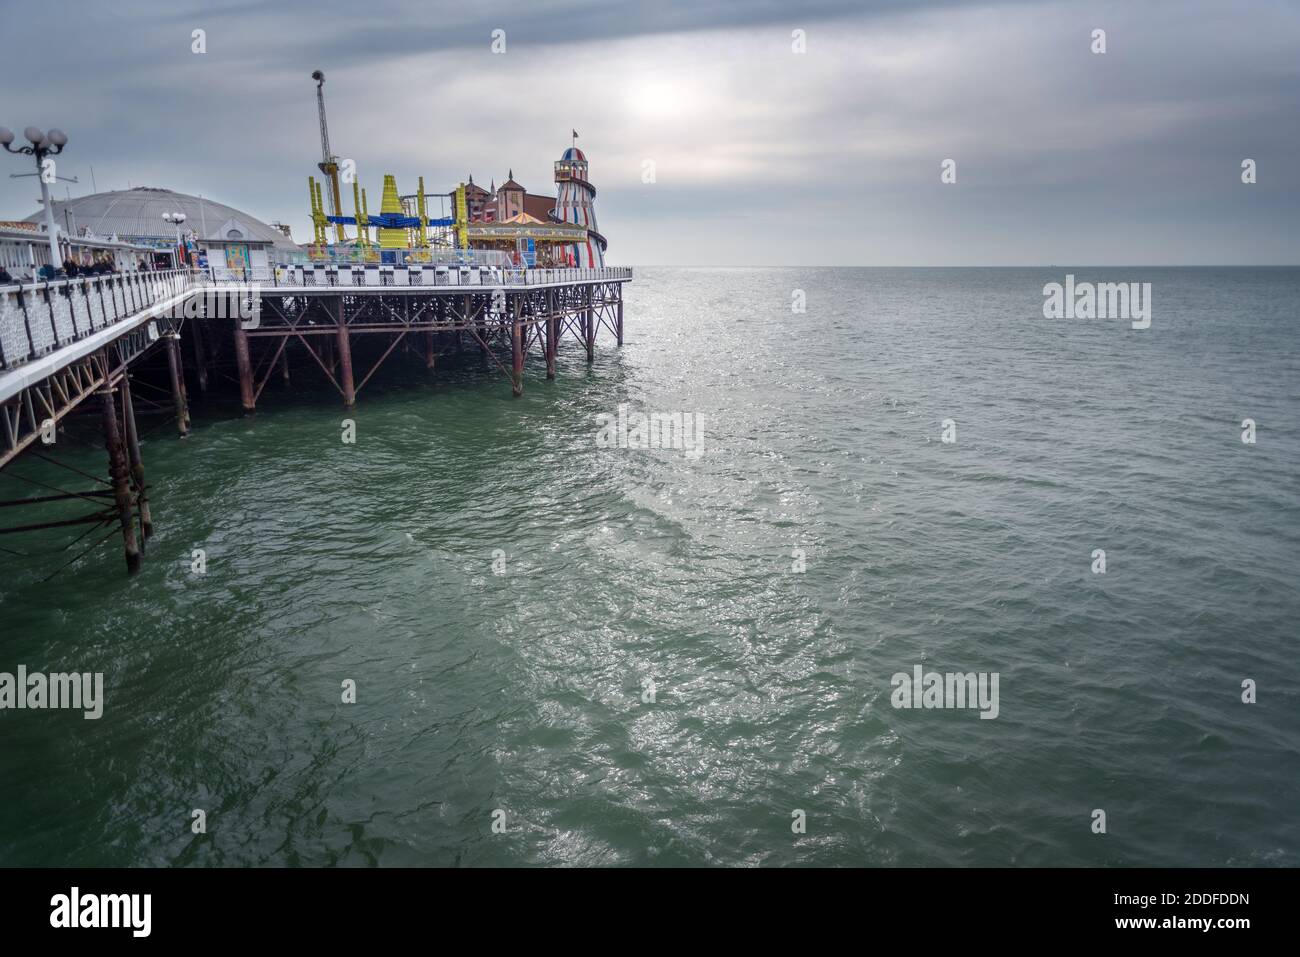 At the iconic Brighton Pier during the winter low season,visitors are few compared to the busy summer months,but it still retains it's allure for pote Stock Photo